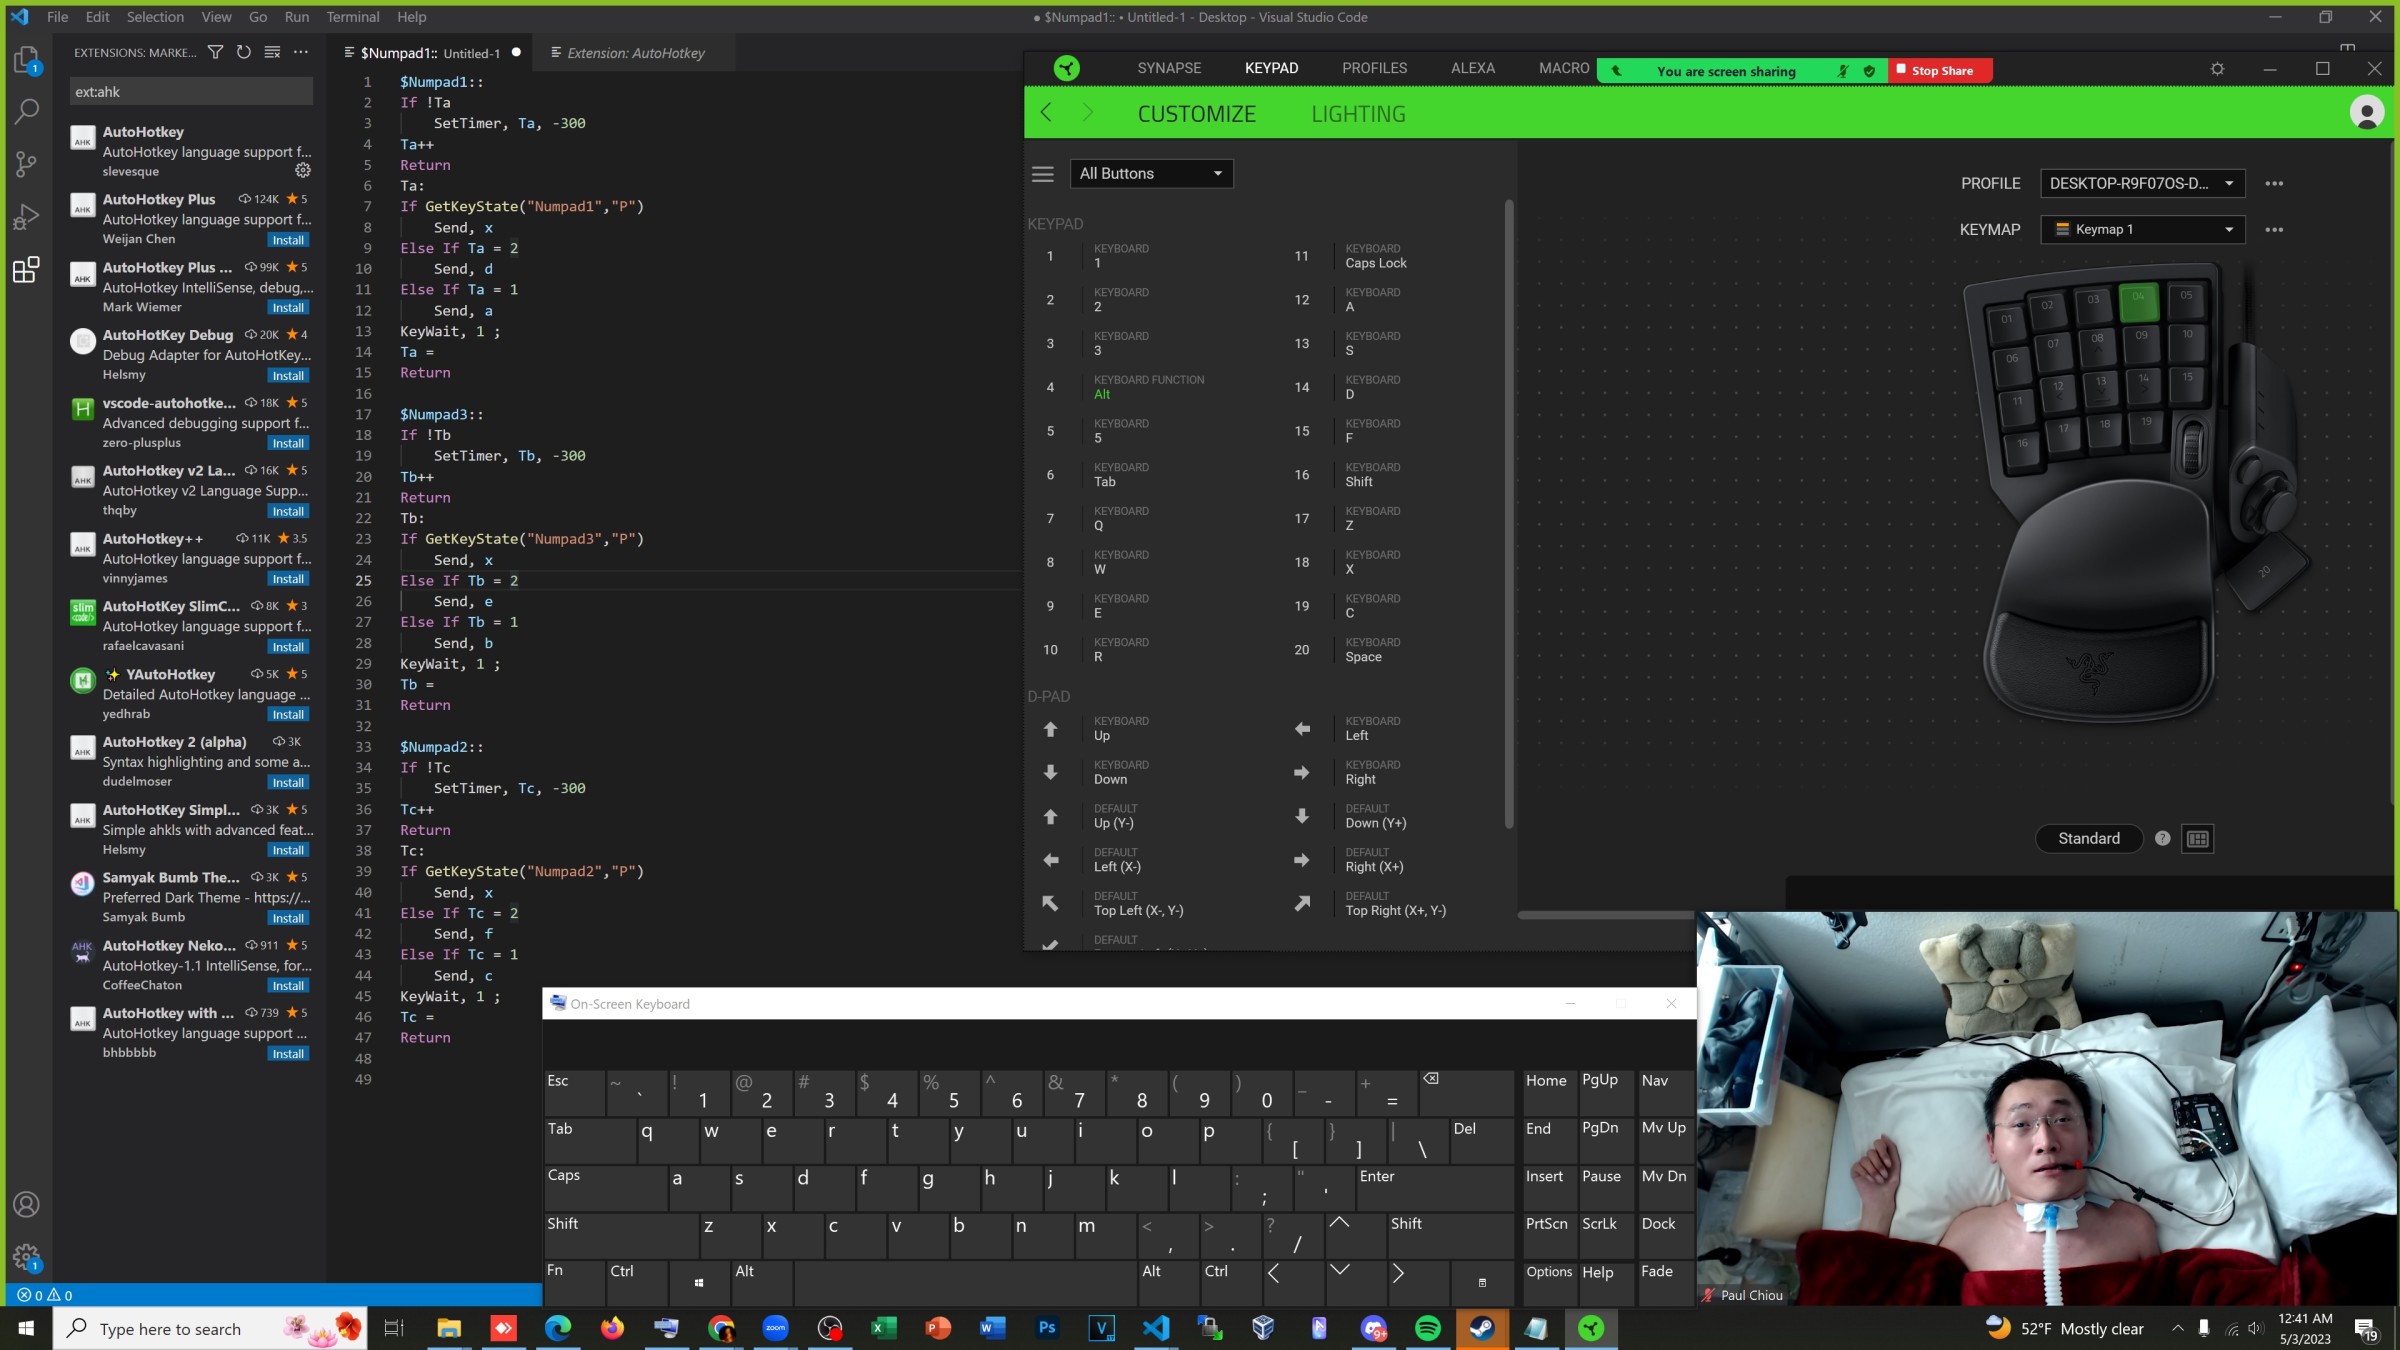 VS Code with Chiou’s key-mapping program using AutoKey, overlaid with an on-screen keyboard, a picture-in-picture of Chiou and his custom switch for gaming, and a window of Synapse, an application that provides macros for gaming.